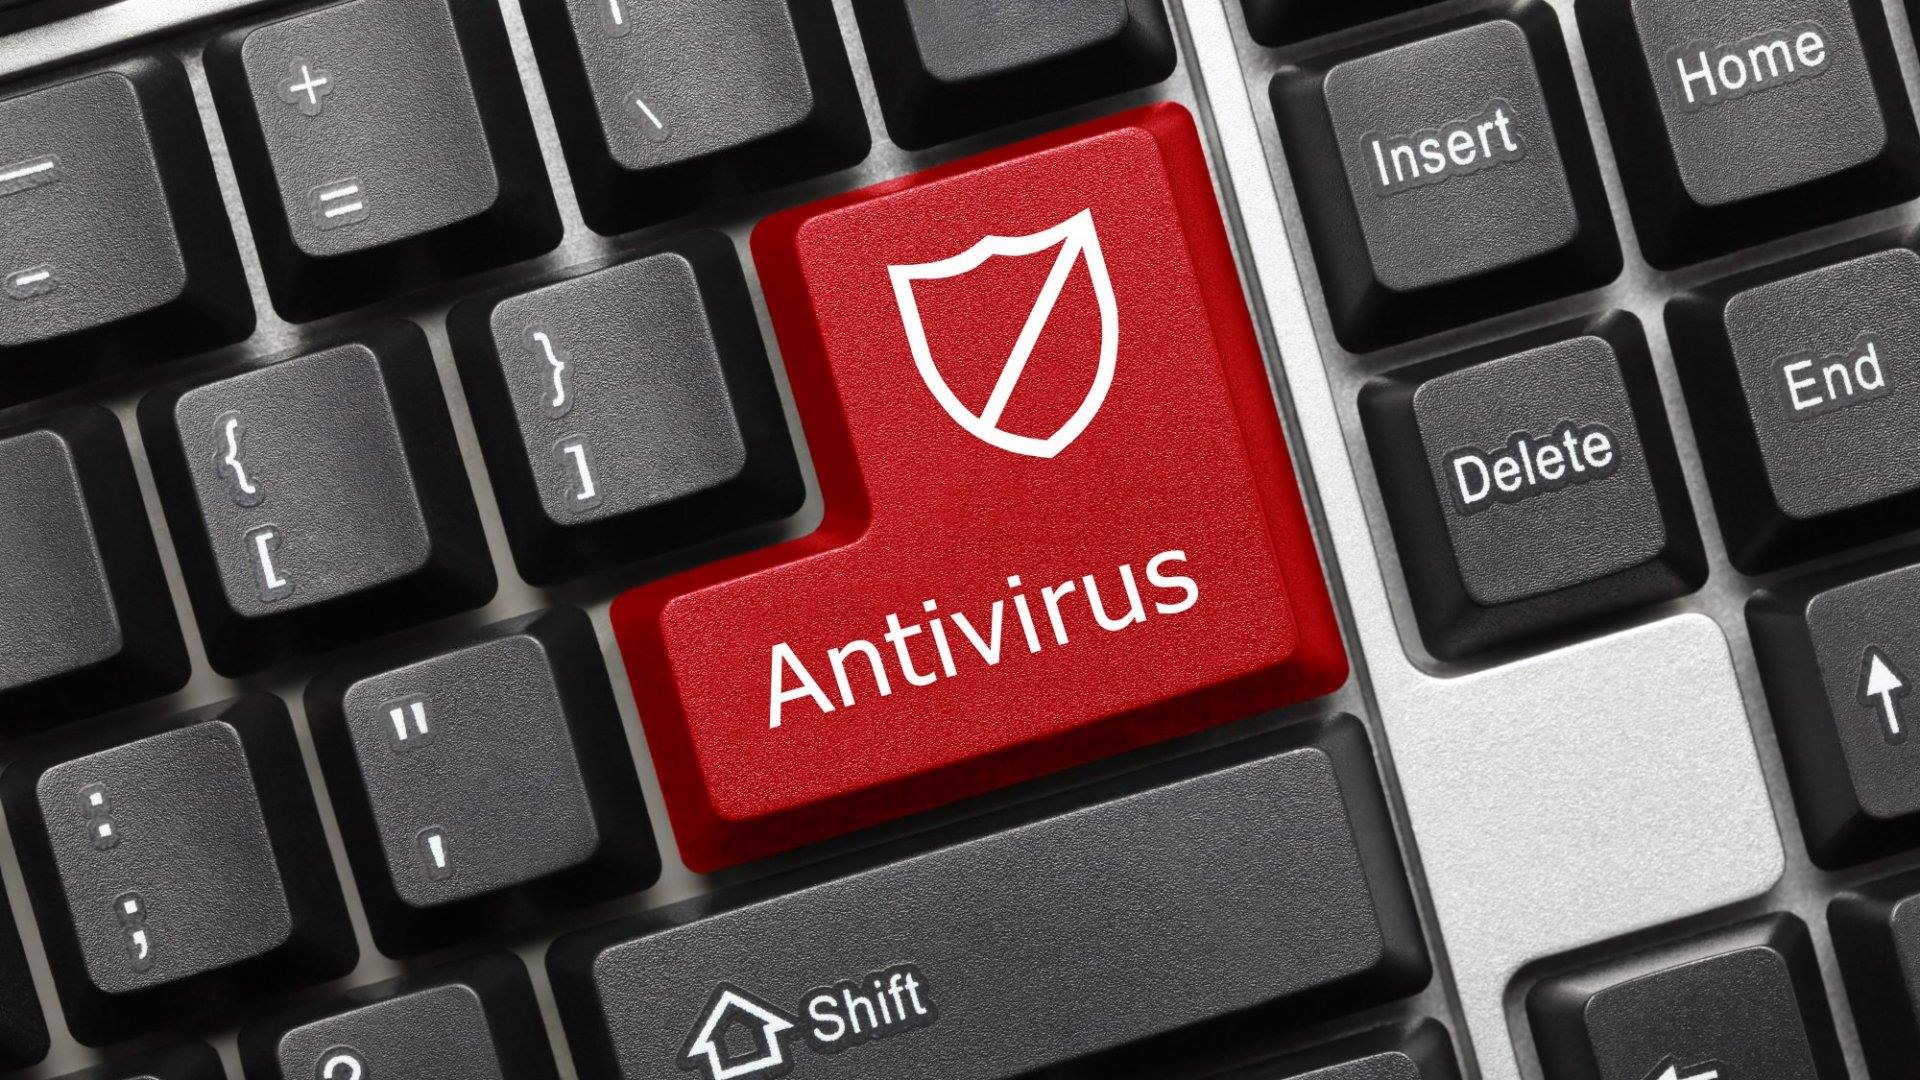 What Is Antivirus And What Does It Do?